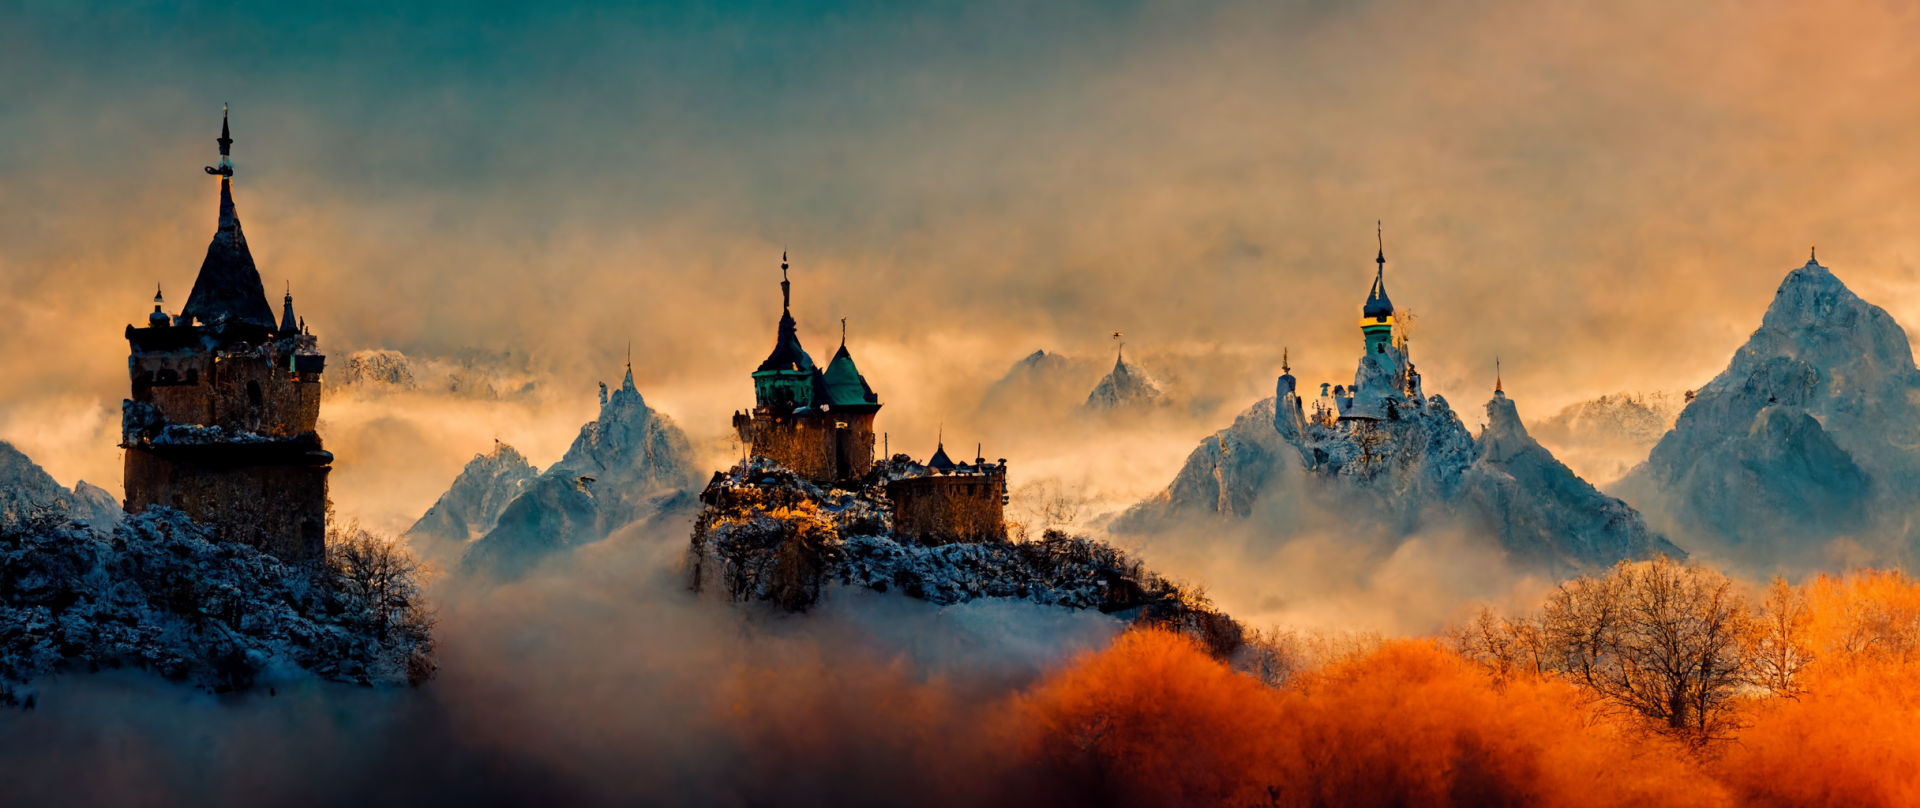 bd3faccd-e23d-460c-9be5-473c2ca50edf_S3RAPH_httpss.mj.runk4ulLb__fantasy_kingdom._warm_tones._castle_towers._background_hills_waterfalls_of_snow.png